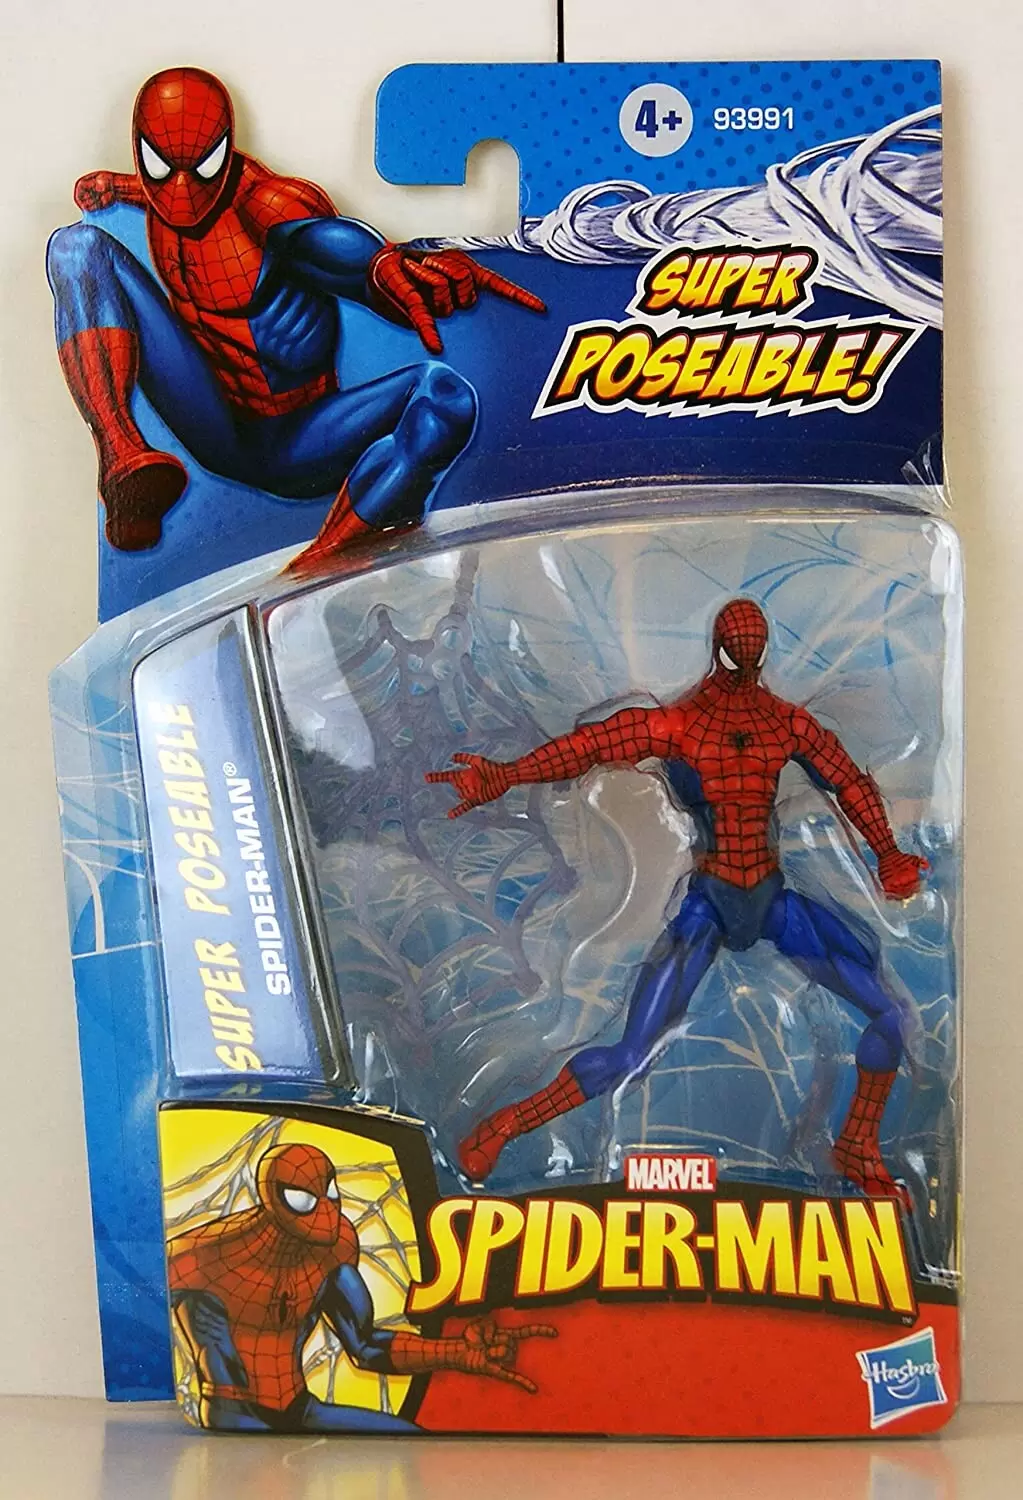 Super Poseable Spider-Man - Classic Spider-Man action figure